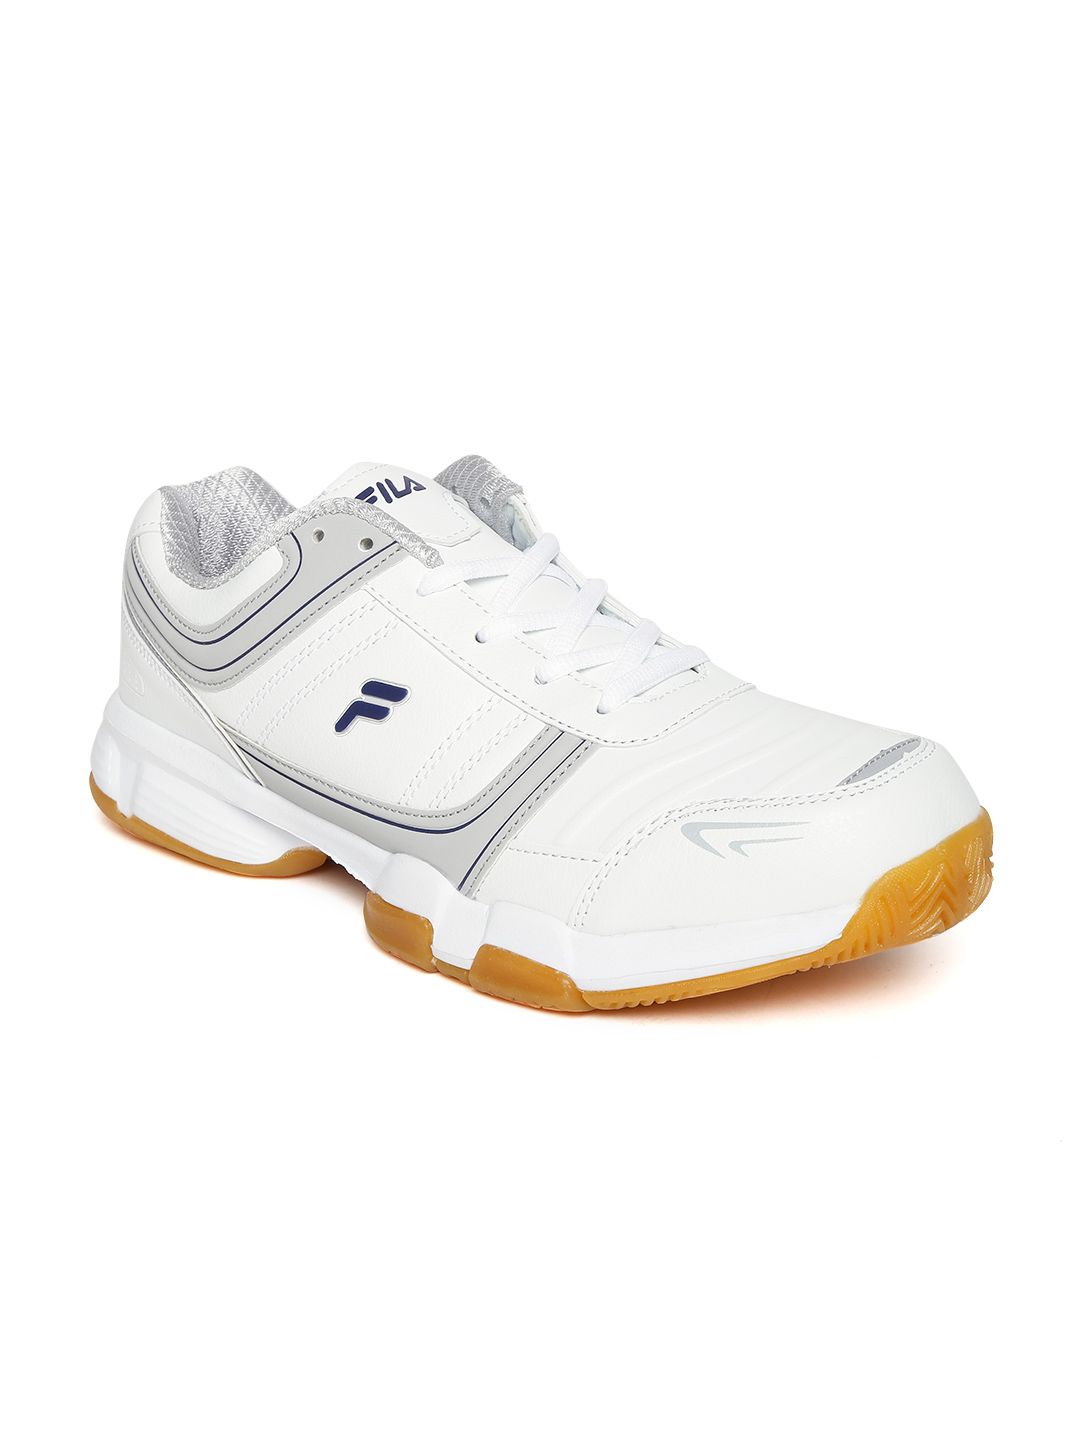 fila florence sock shoes for sale